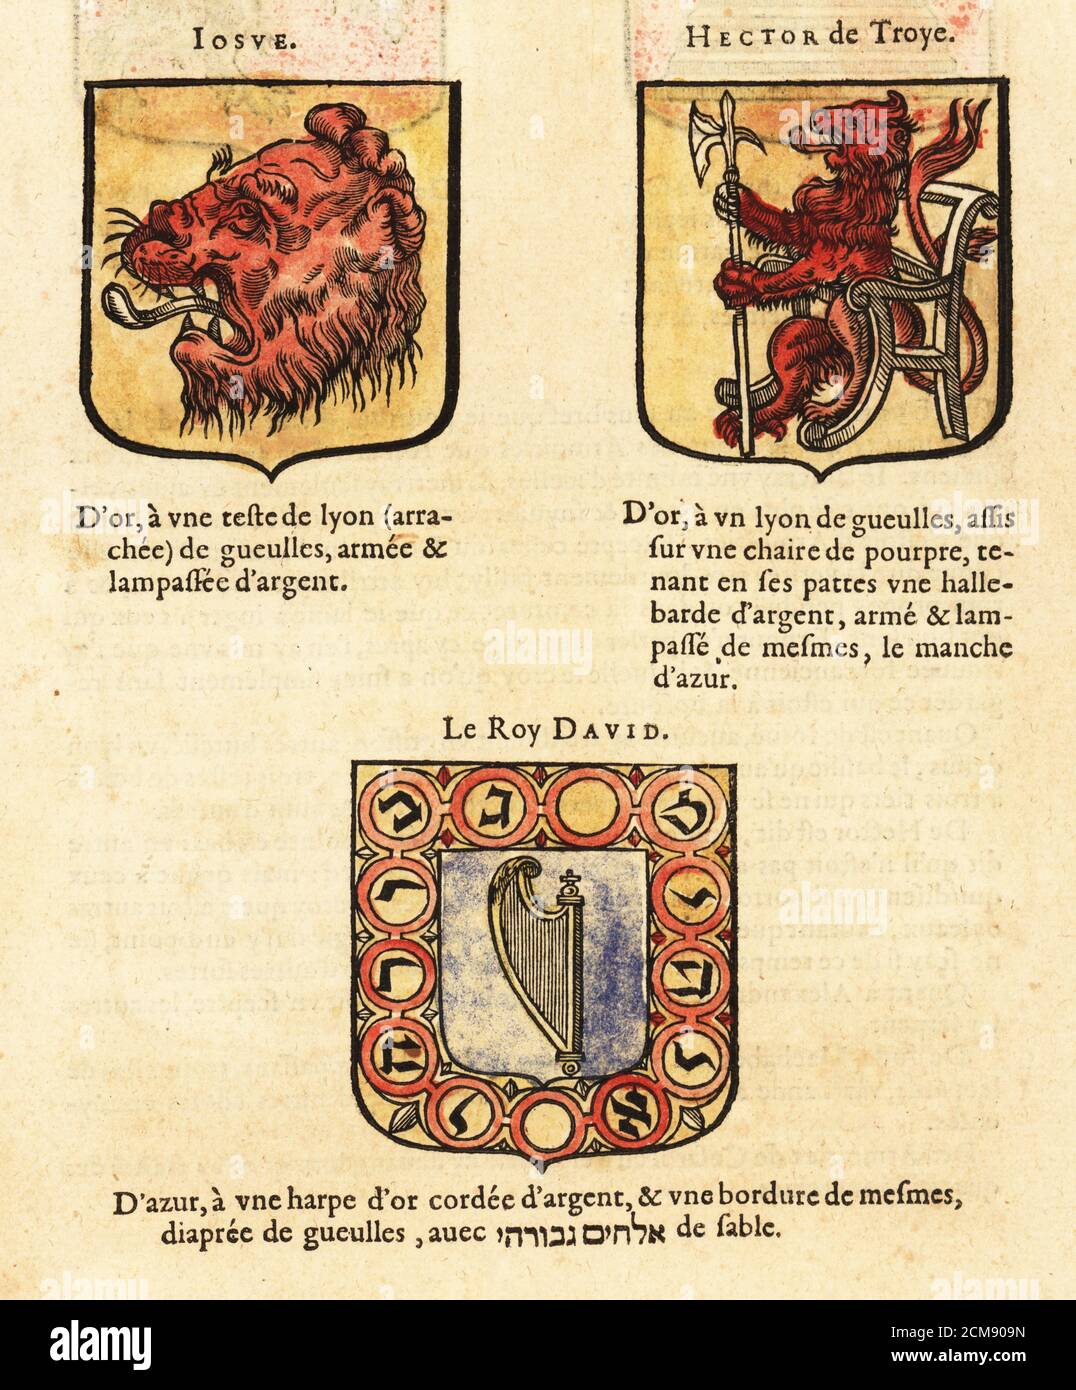 Coats of arms of the Nine Worthies: Joshua with lion’s head, Hector of Troy with lion in a chair, and King David with harp and Hebrew characters. JOSUE, HECTOR de Troye, Le Roy DAVID. Handcoloured woodblock engraving from Hierosme de Bara’s Le Blason des Armoiries, Chez Rolet Boutonne, Paris, 1628 Stock Photo